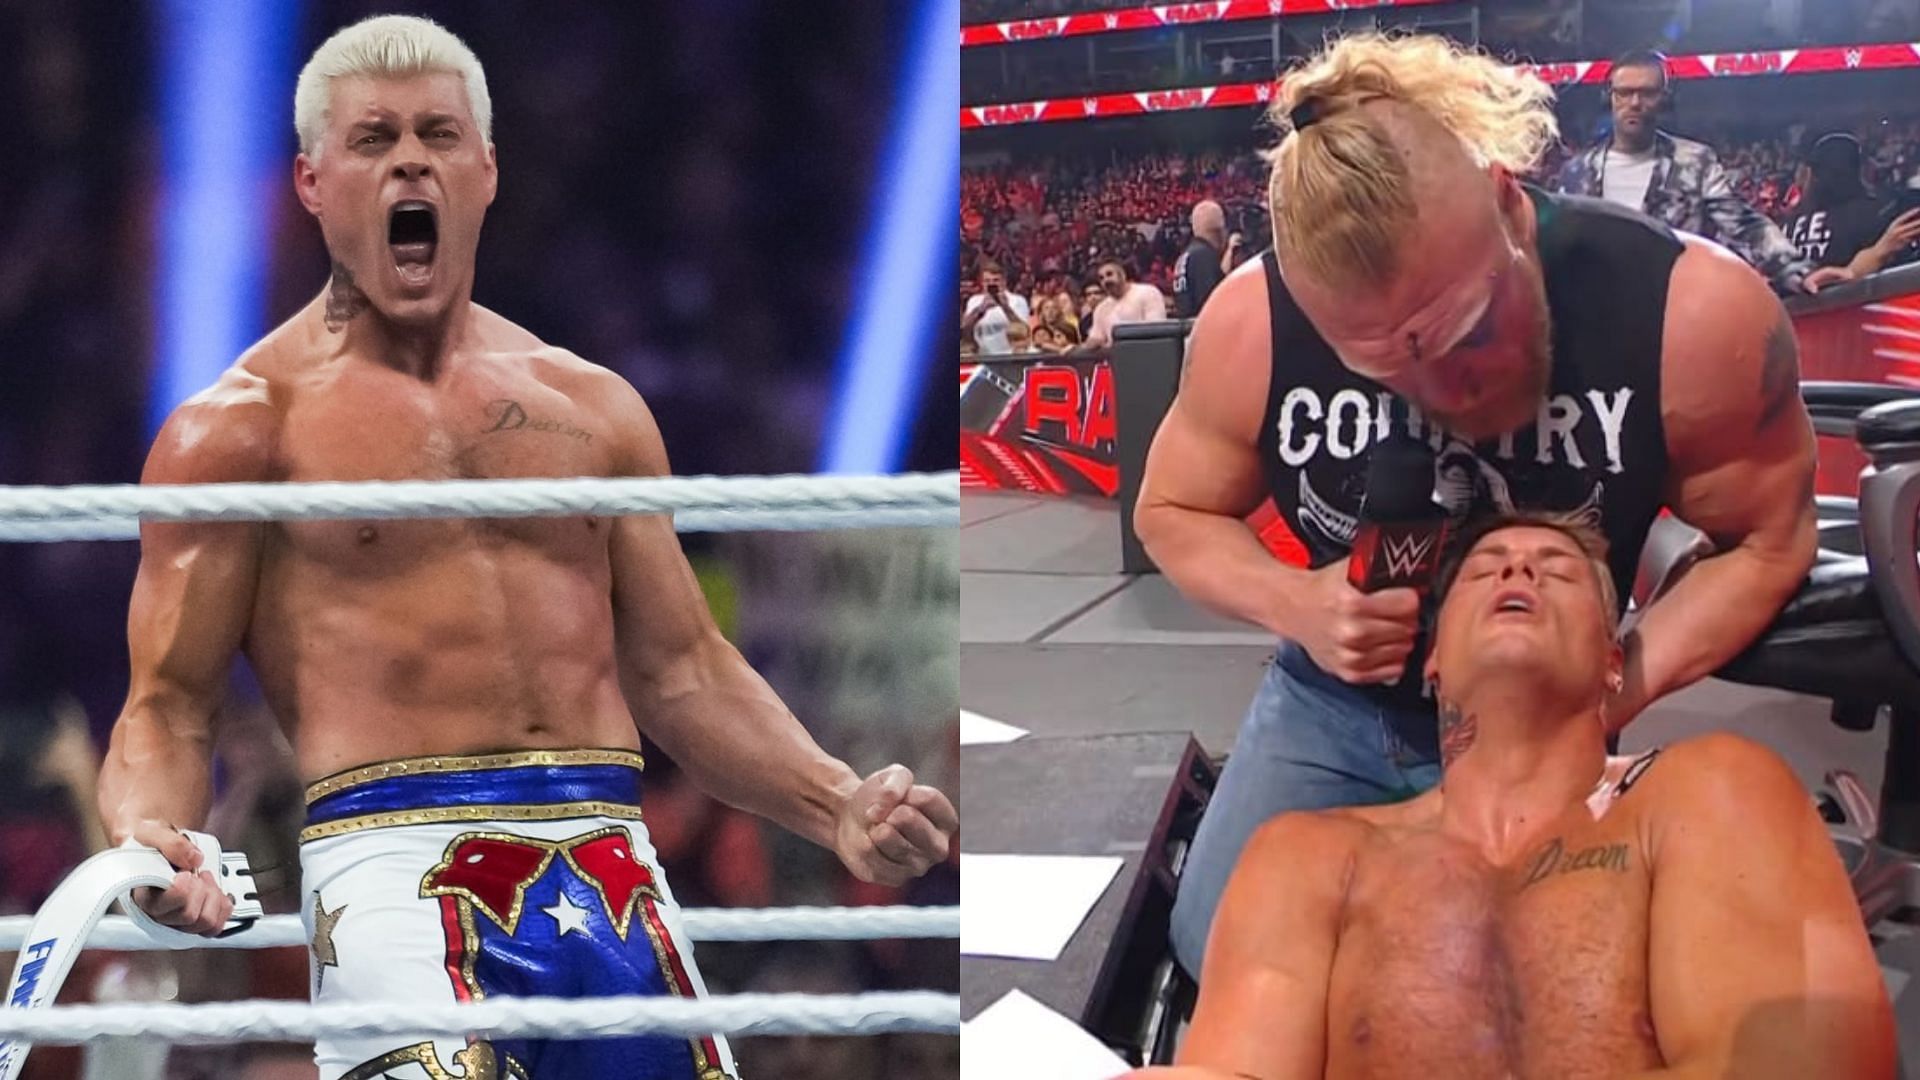 Brock Lesnar and Cody Rhodes go to battle at Night of Champions.